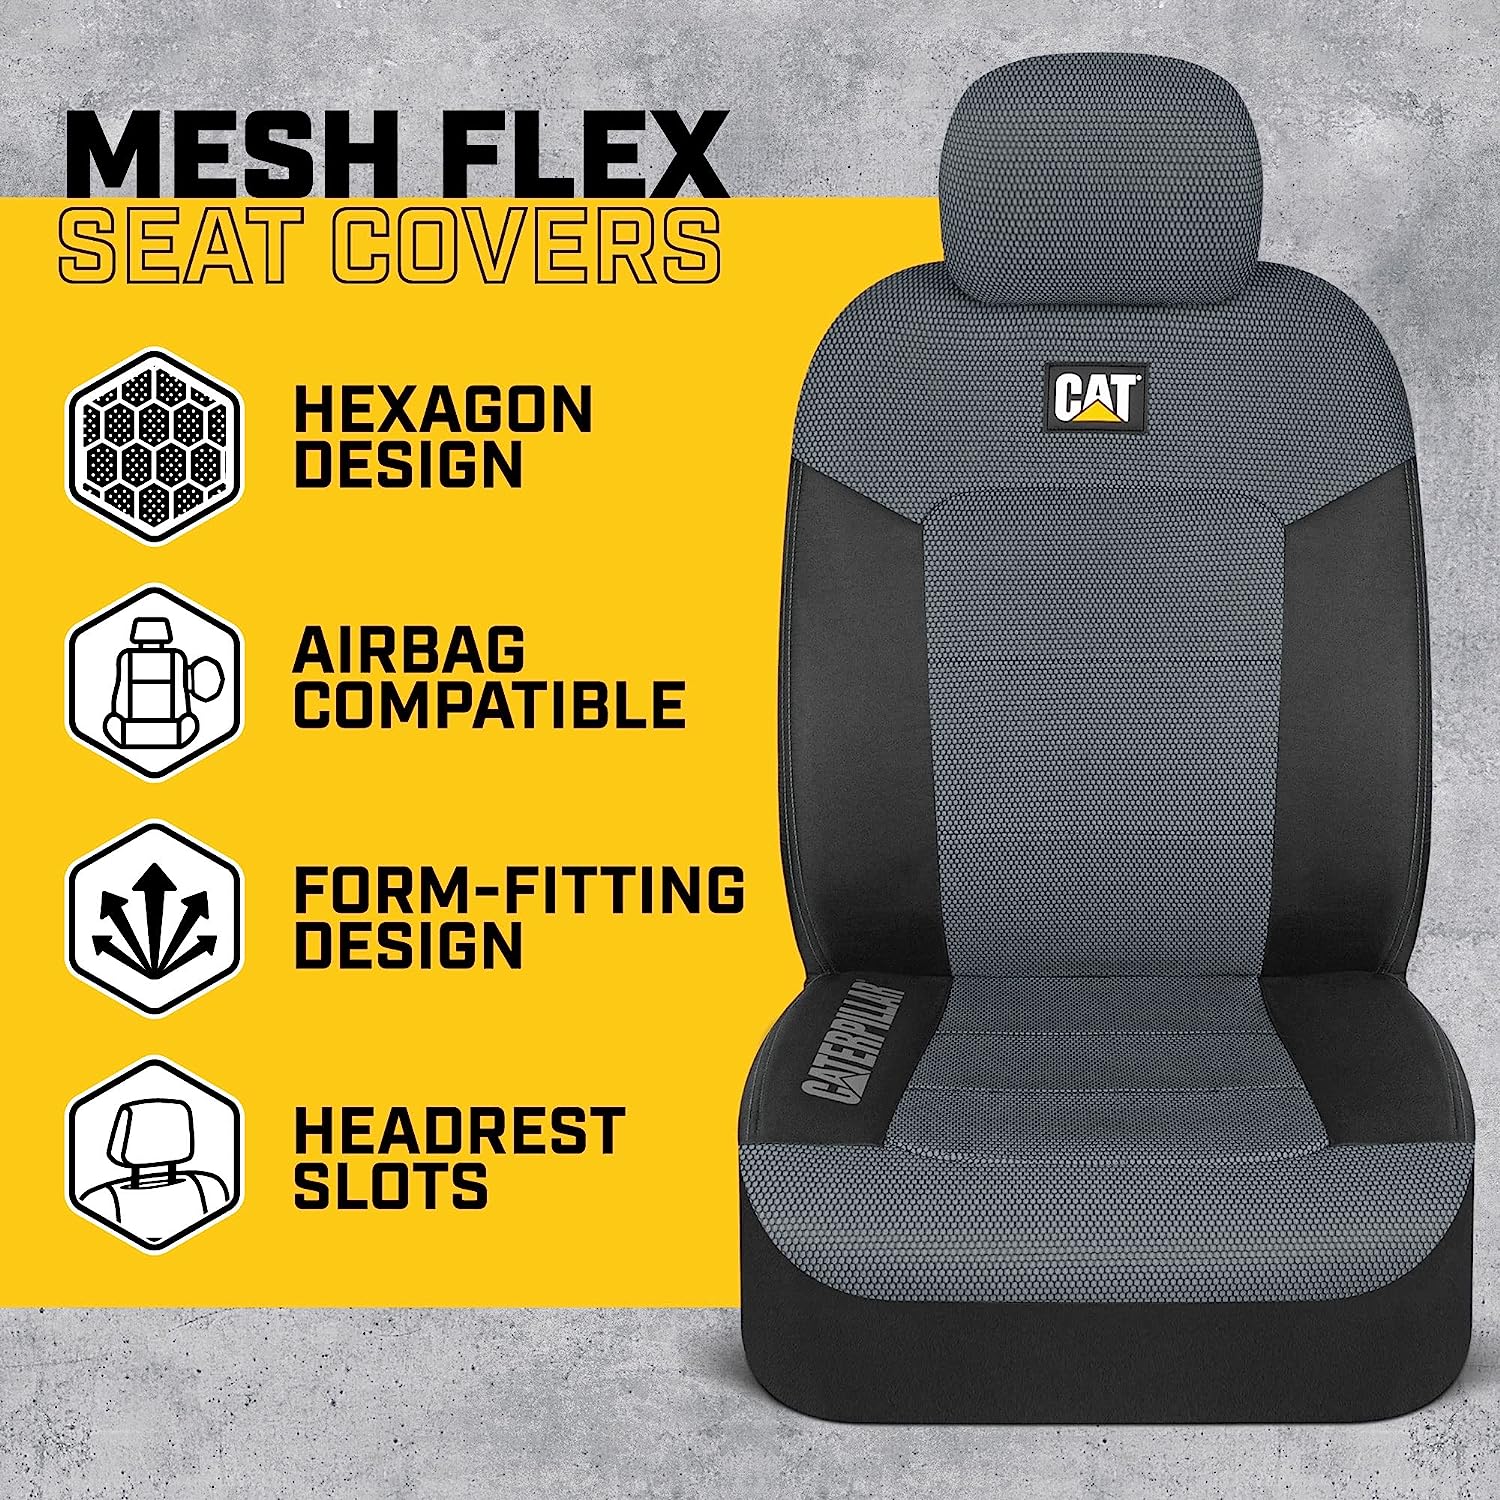 Cat MeshFlex Automotive Seat Covers for Cars Trucks and SUVs – Gray Car Seat Covers for Front Seats, Truck Seat Protectors with Comfortable Mesh Back, Set of 2